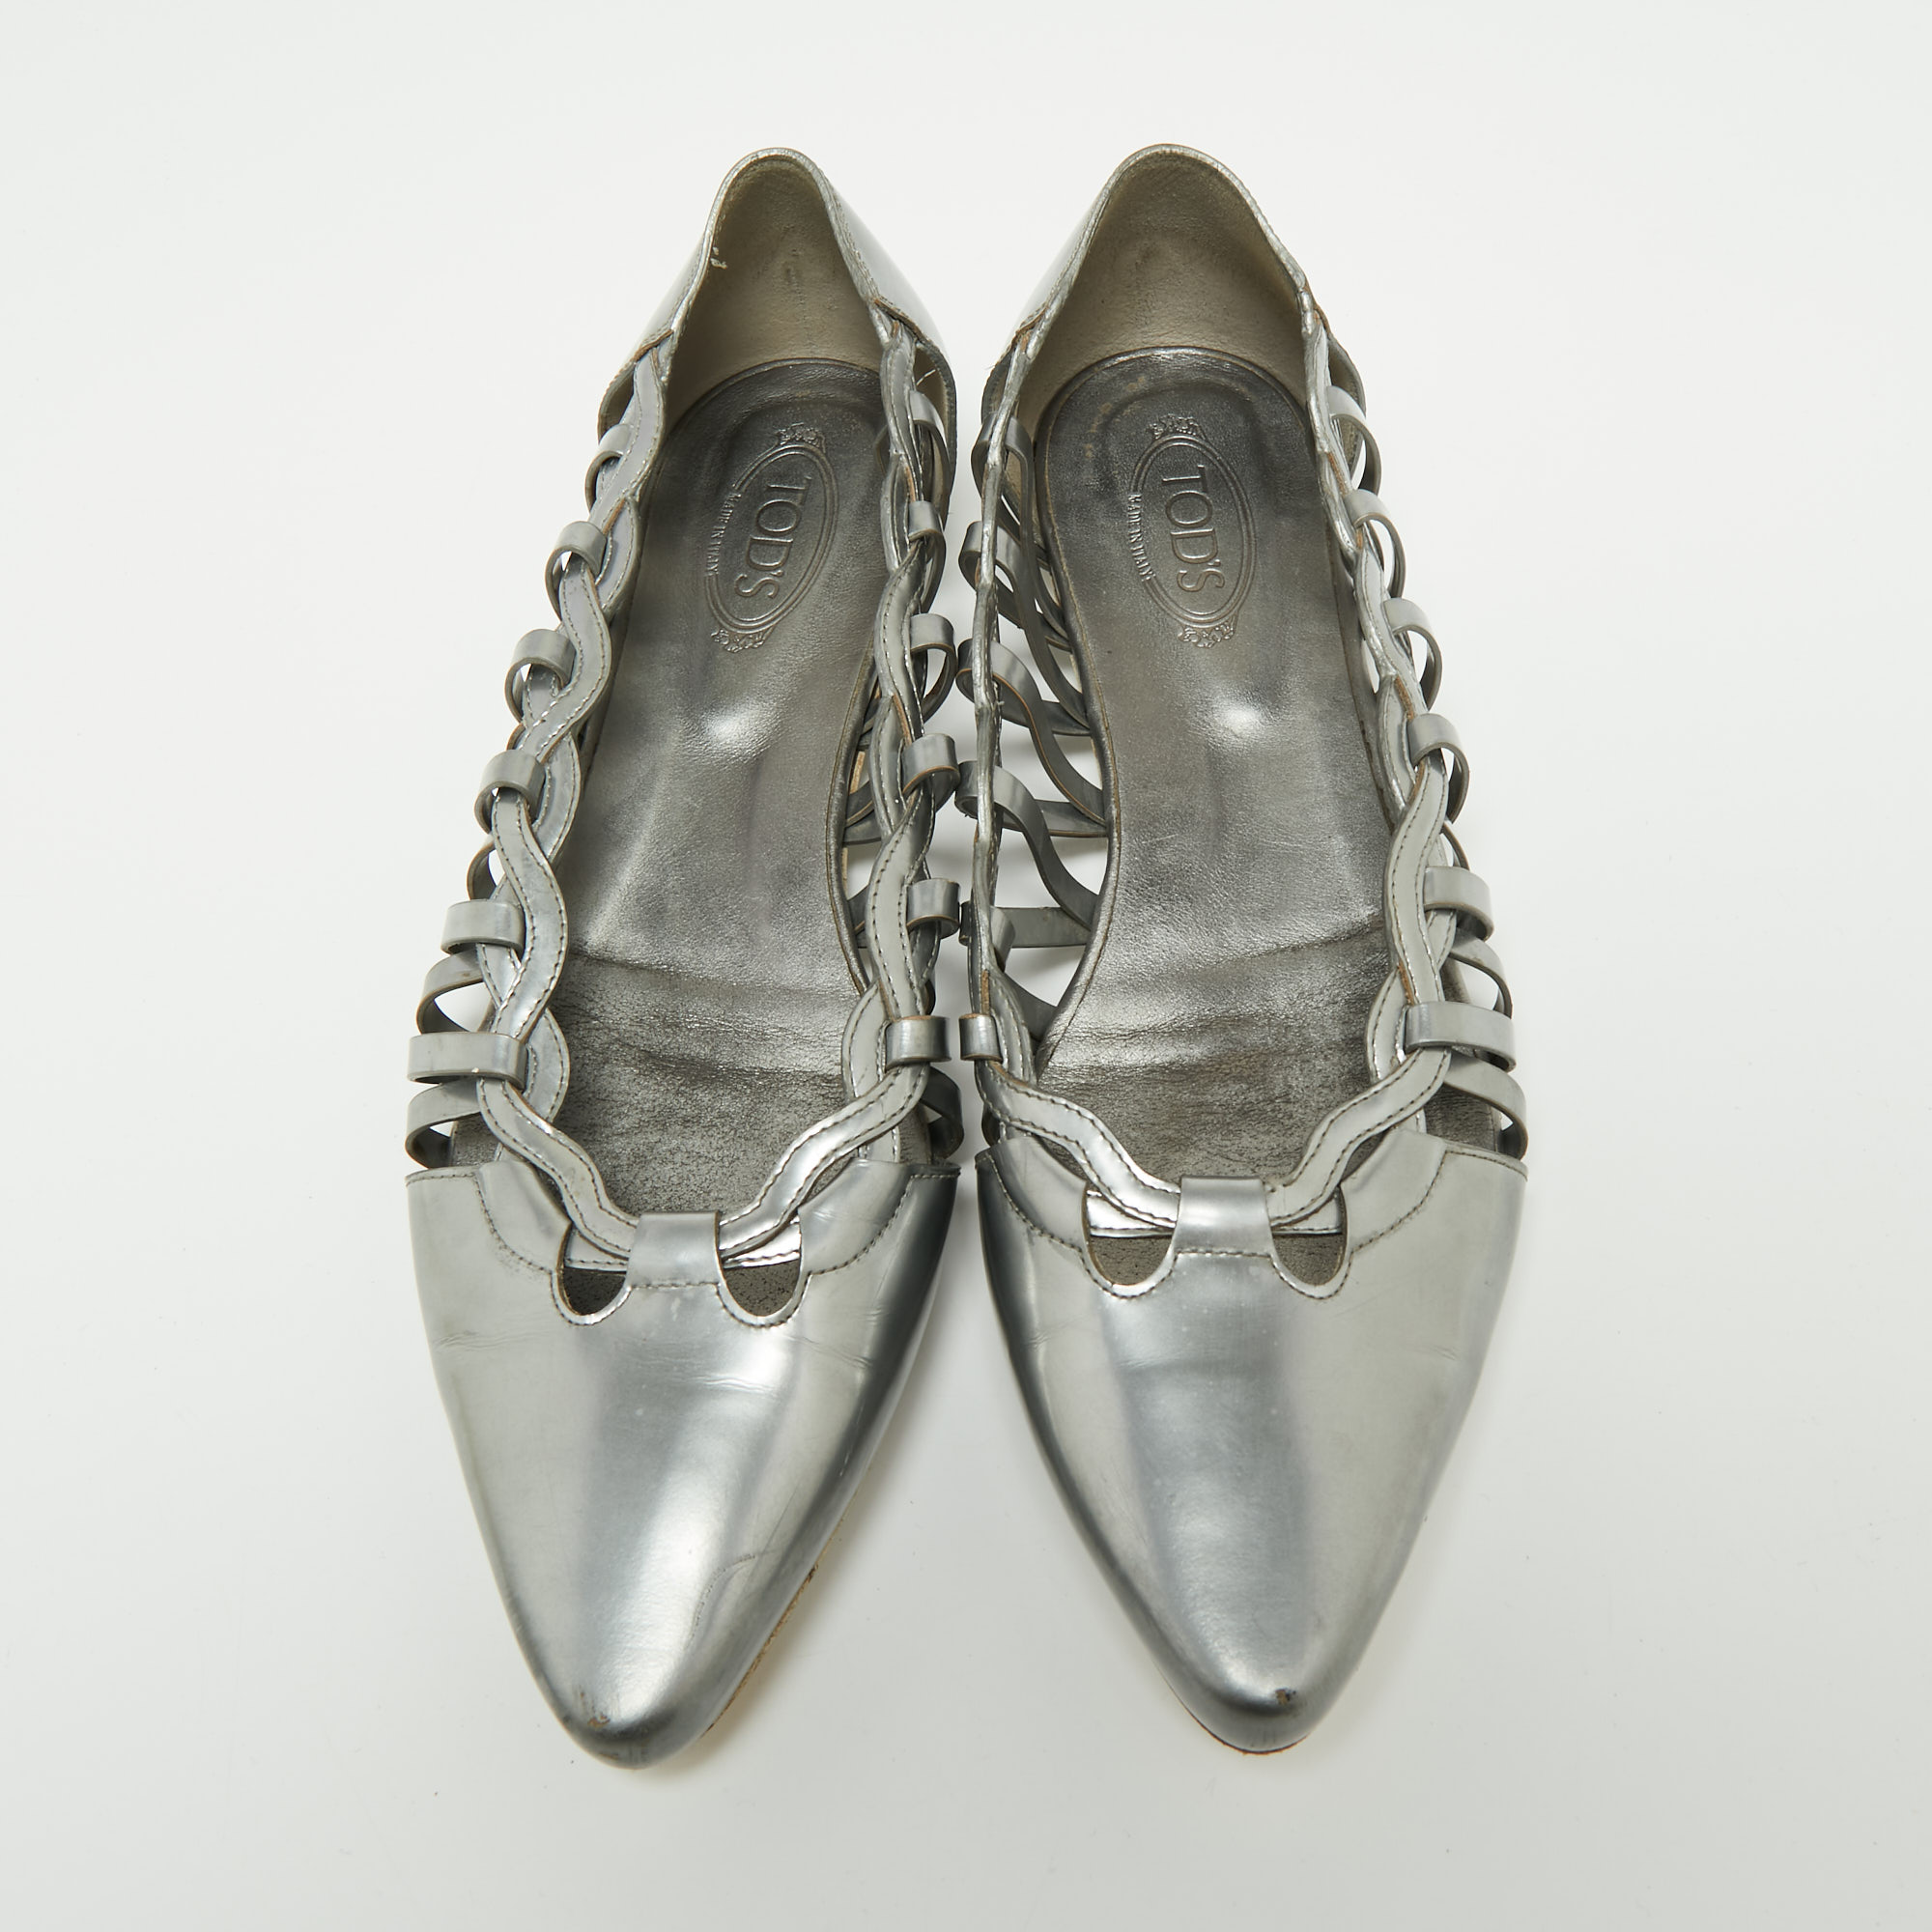 Tod's Grey Patent Leather Braided Detailed Pointed Toe Ballet Flats Size 39.5